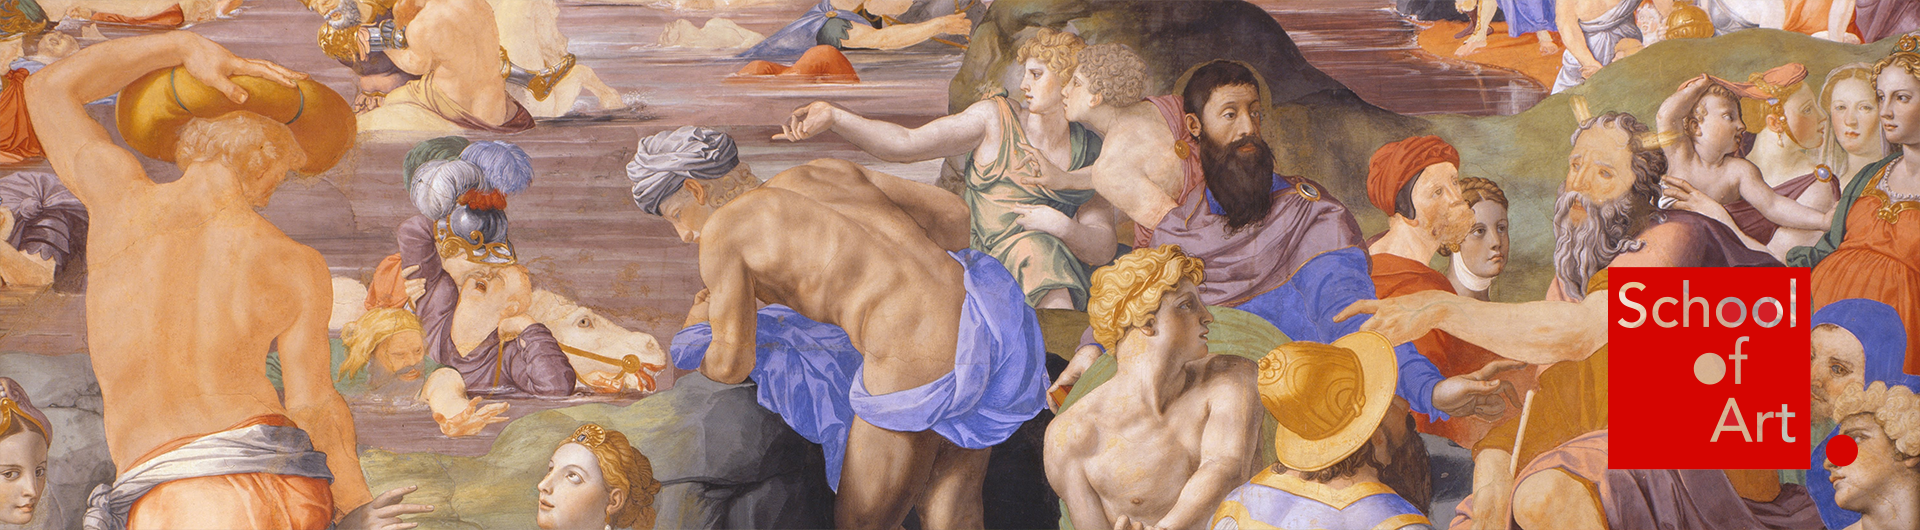 Portion of a religious fresco by Agnolo Bronzino (from 1540-1545) depicting the crossing of the Red Sea